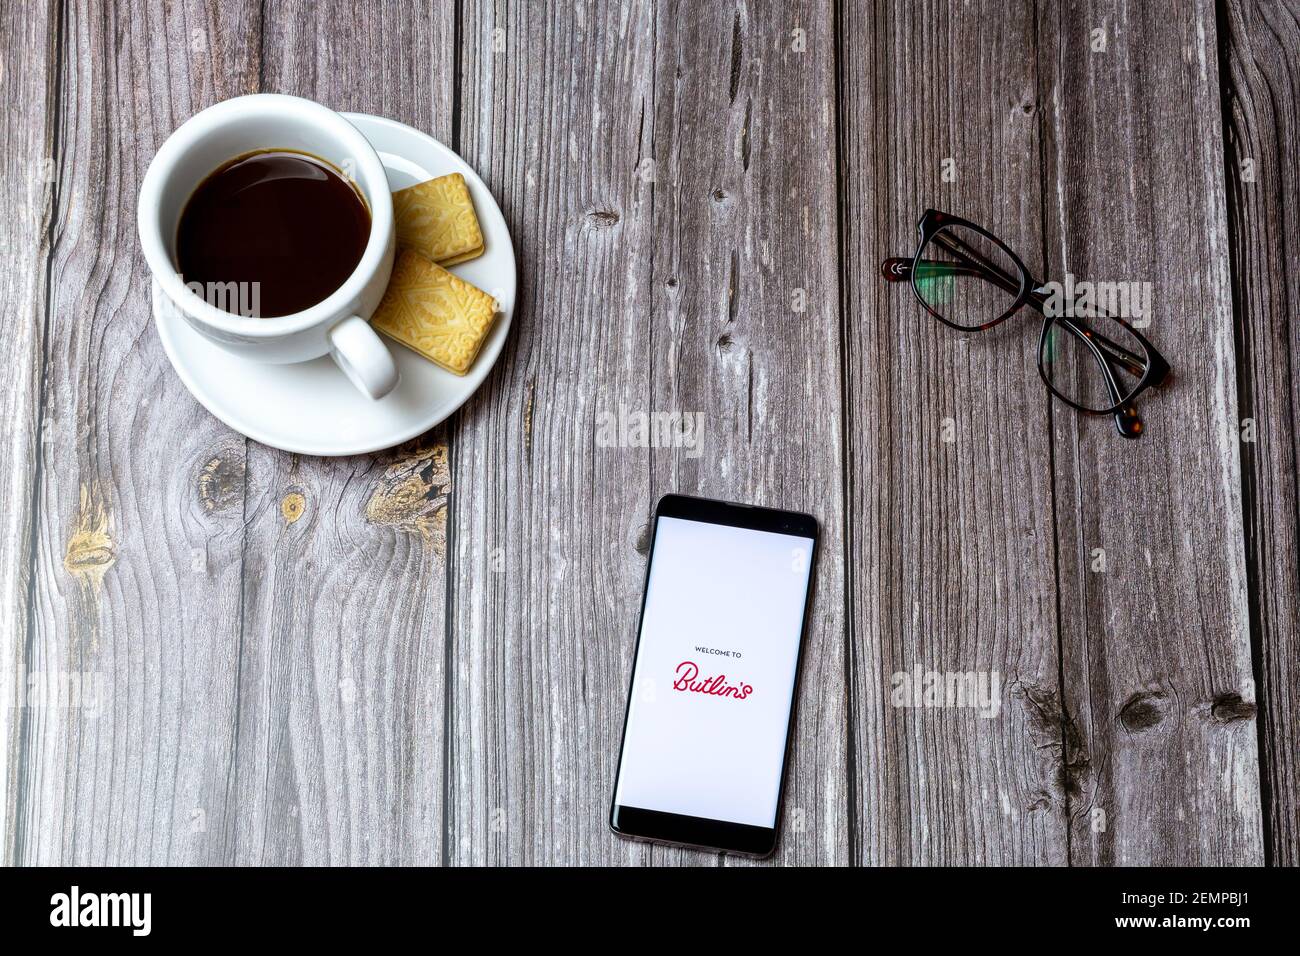 A mobile phone or cell phone on a wooden table with the Butlins holidays app open next to a coffee and glasses Stock Photo